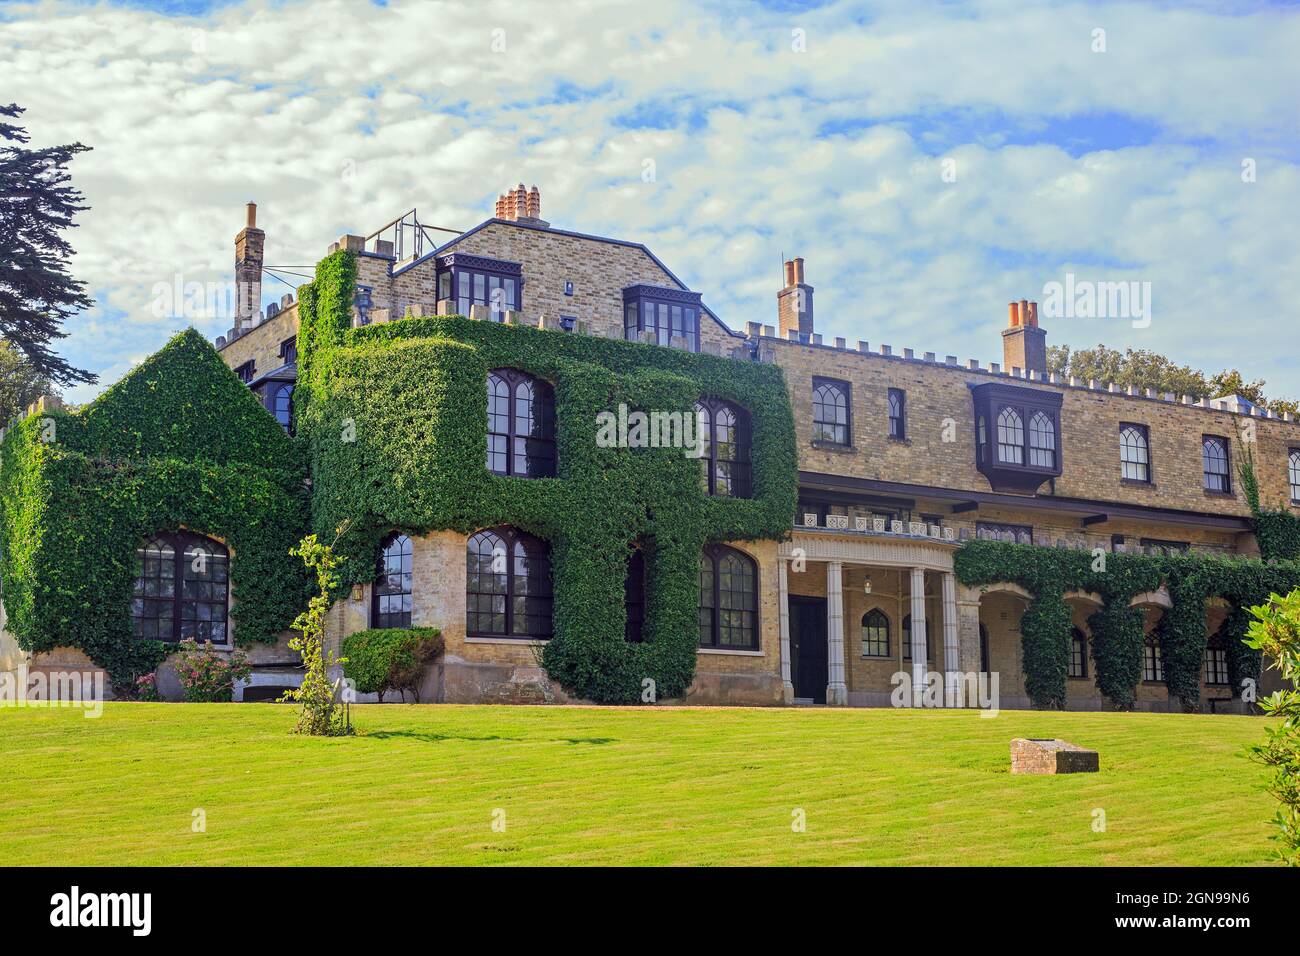 Farringford, Isle of Wight, 2021. This is a Grade 1 Listed Building and was the main residence of the Poet Laureate Alfred, Lord Tennyson from 1853 un Stock Photo